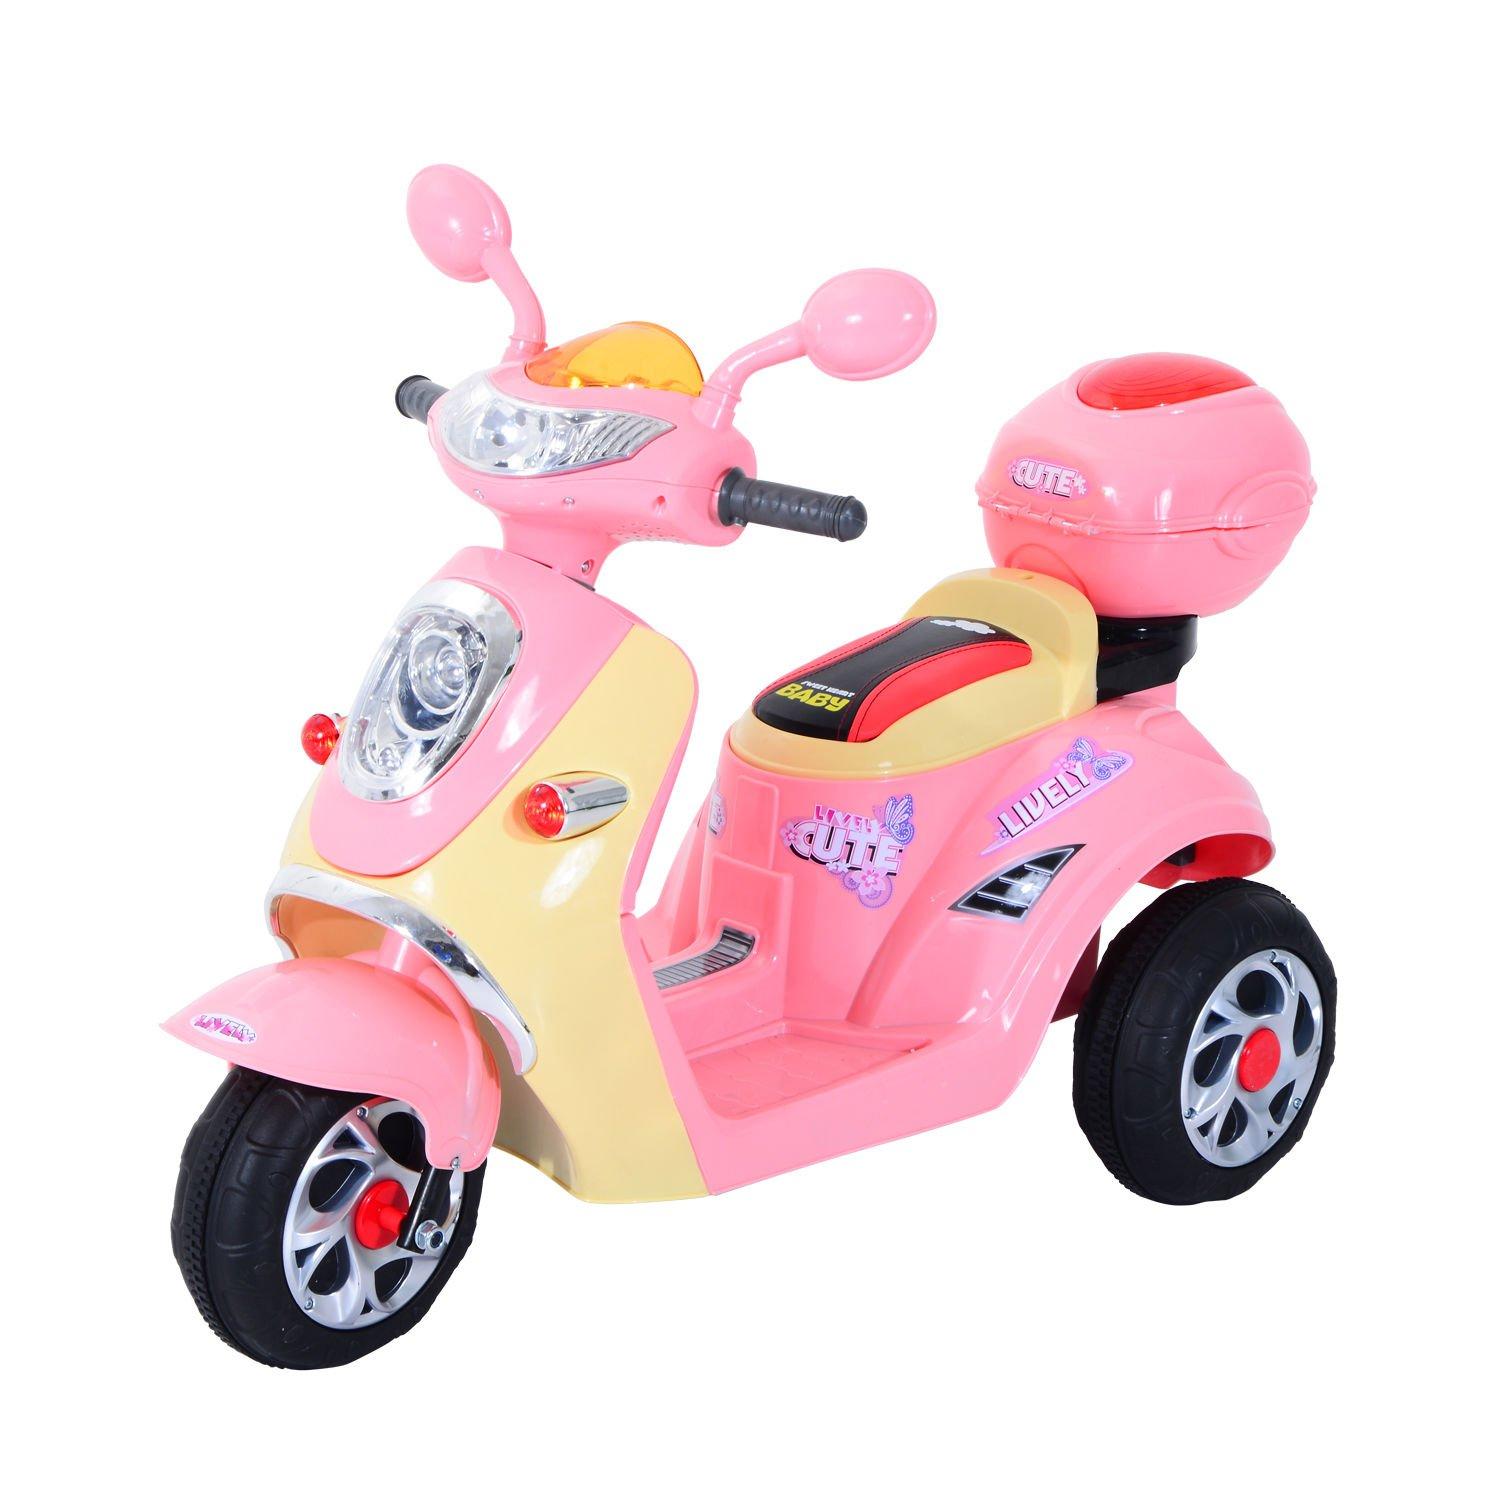 Electric Ride on Toy Motorbike Children Motorcycle Tricycle Safe 6V